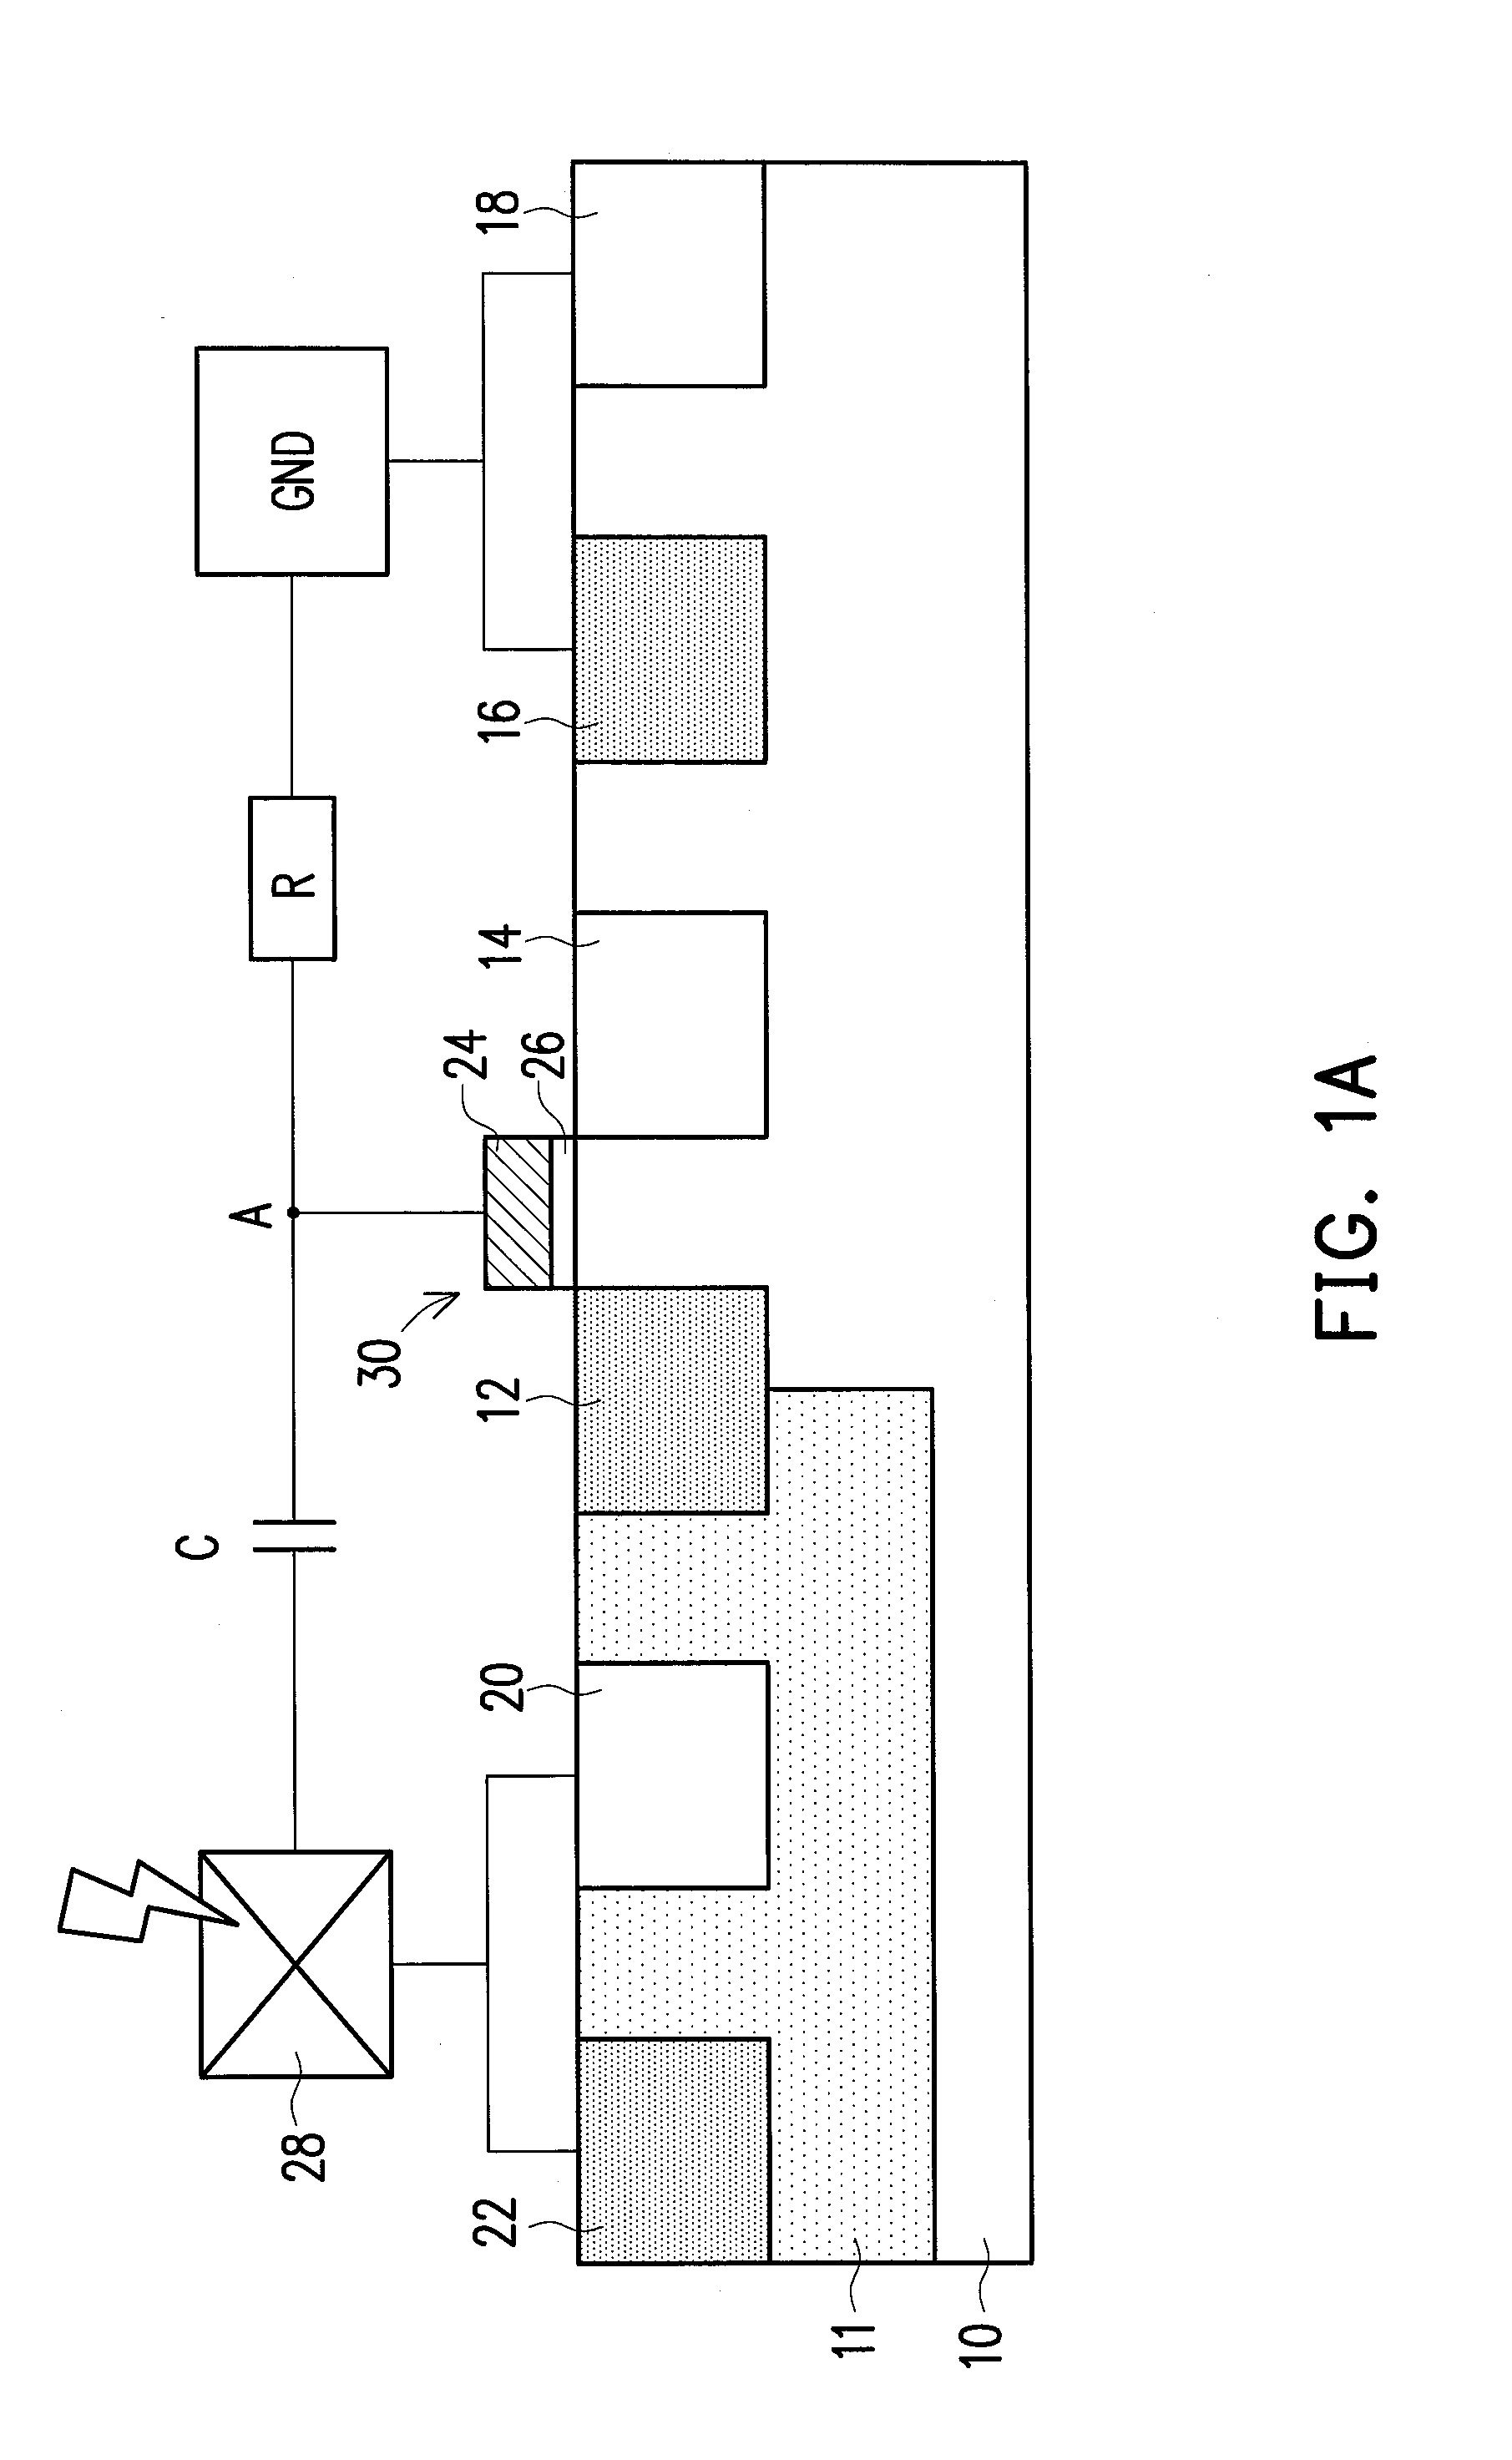 Electrostatic discharge protection device